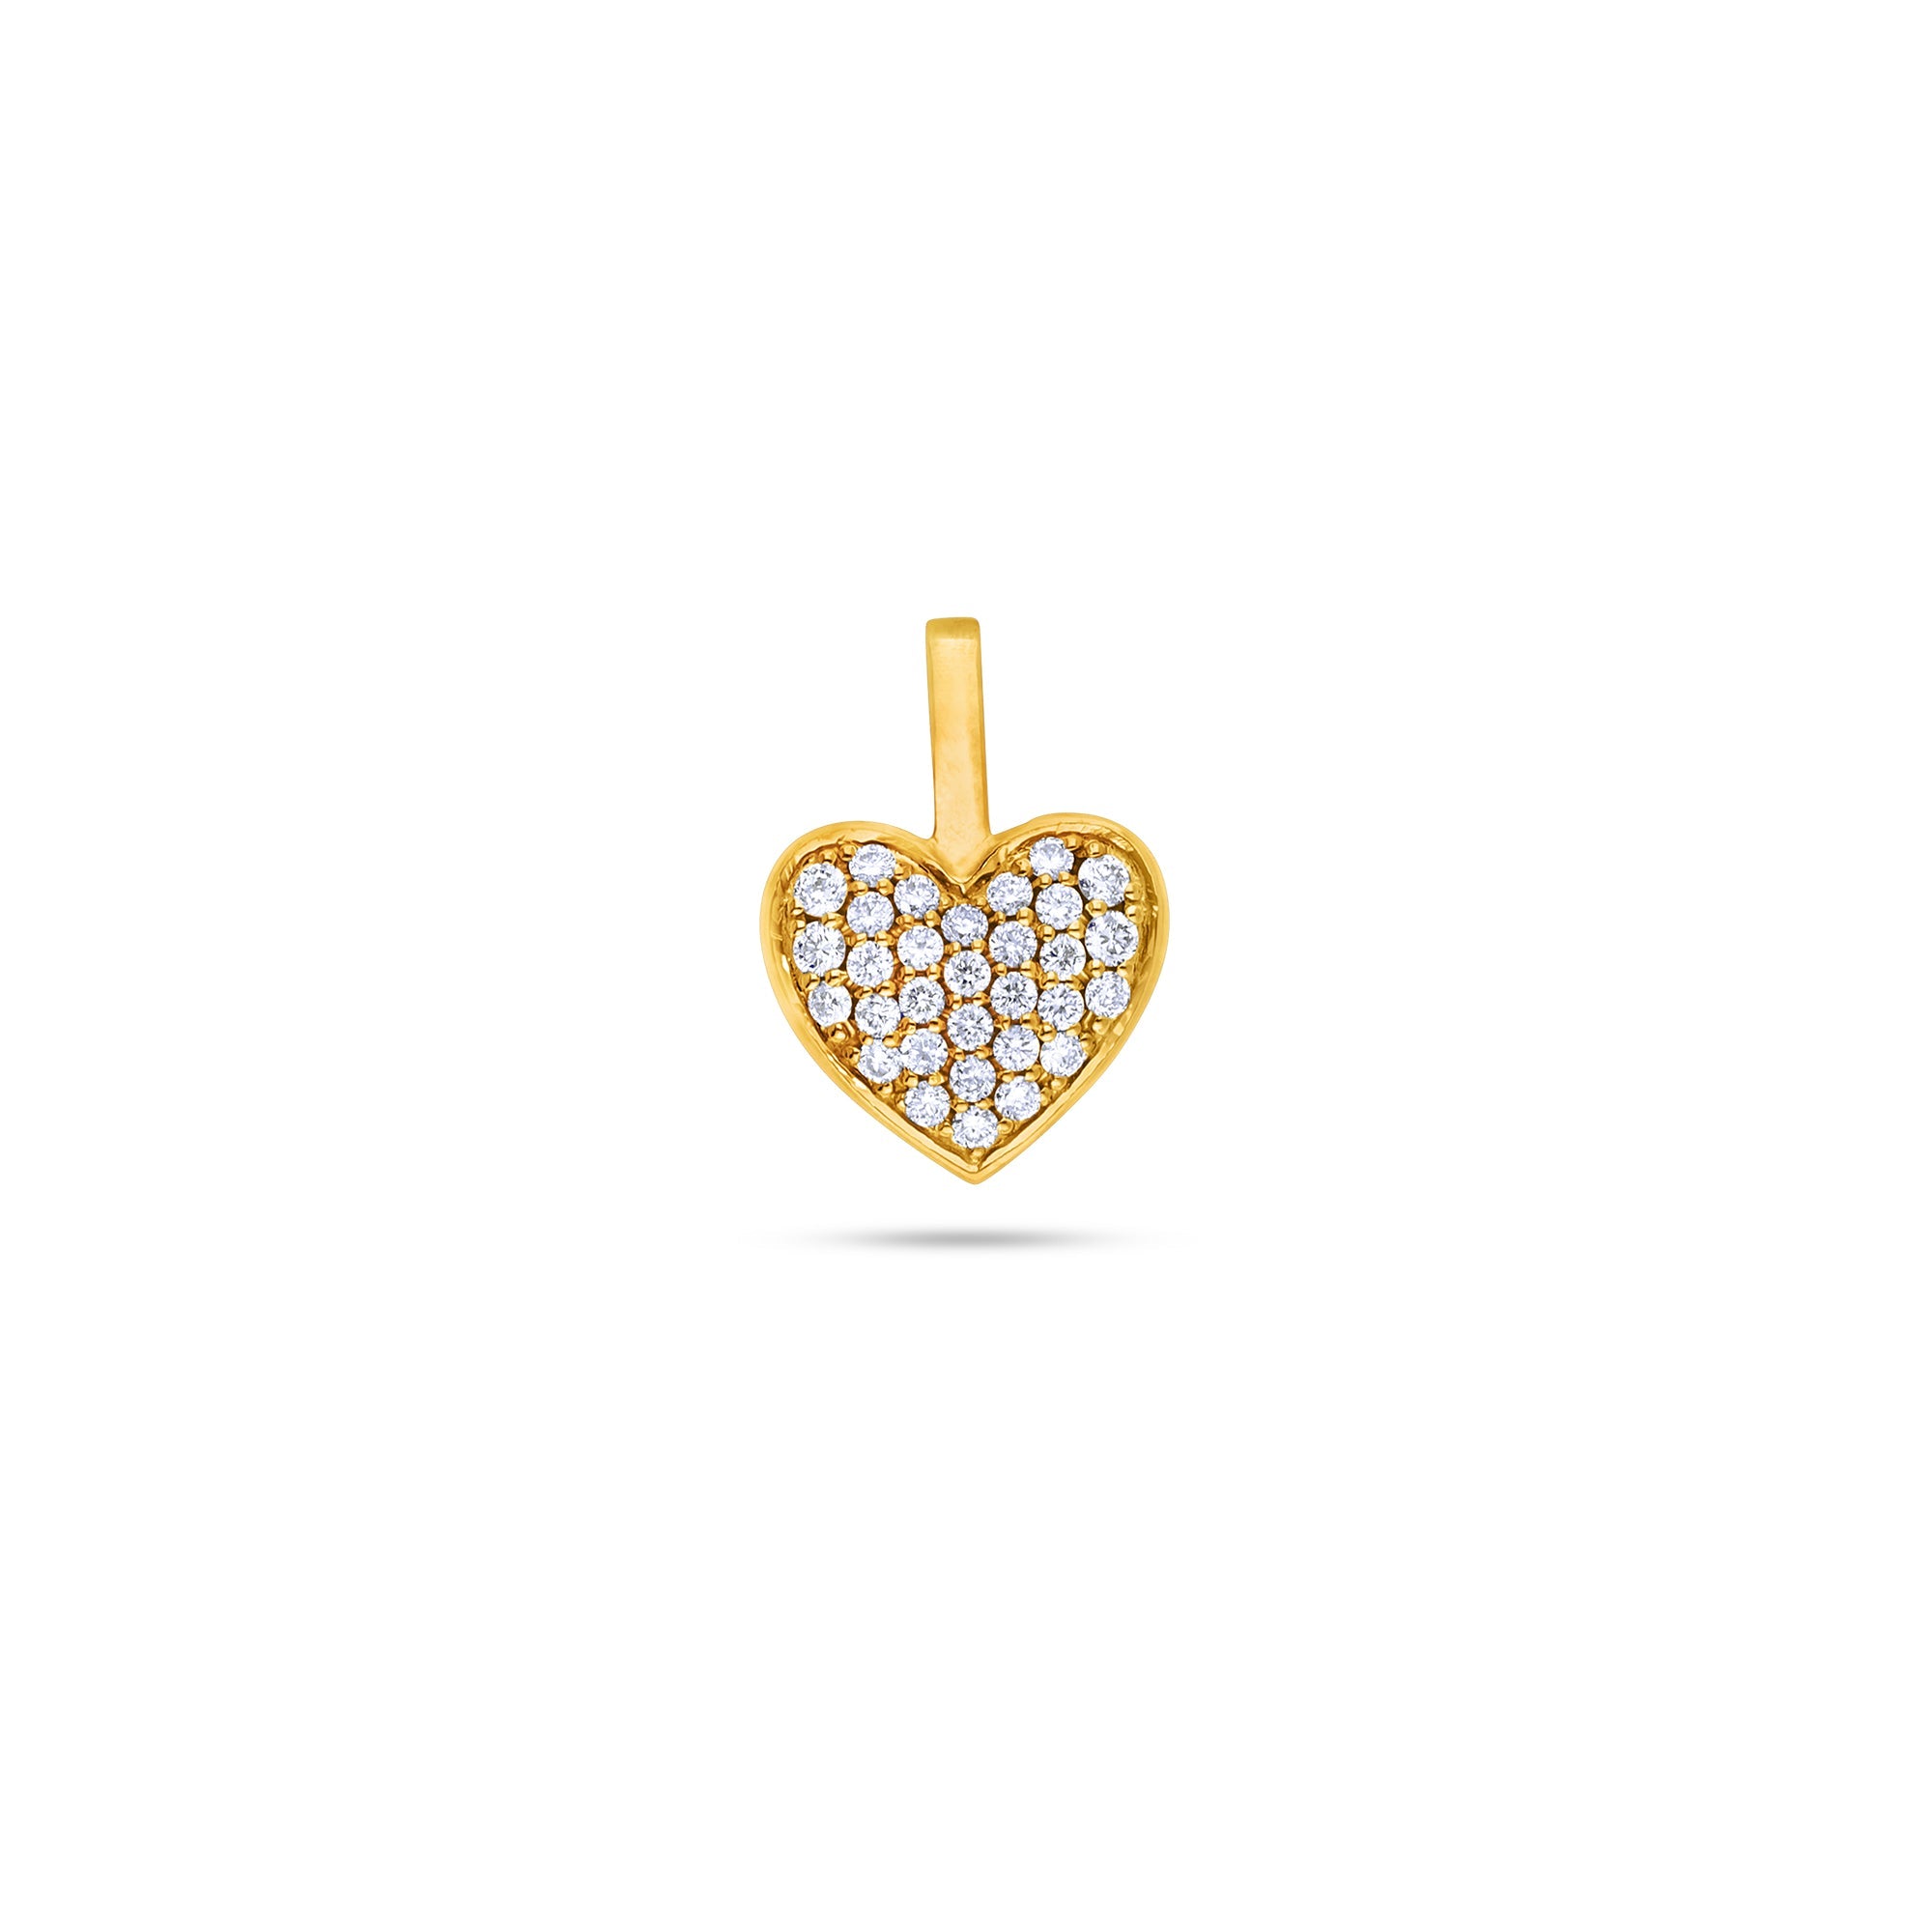 Pico Heart Necklace (14K YELLOW GOLD) - IF & Co. Custom Jewelers